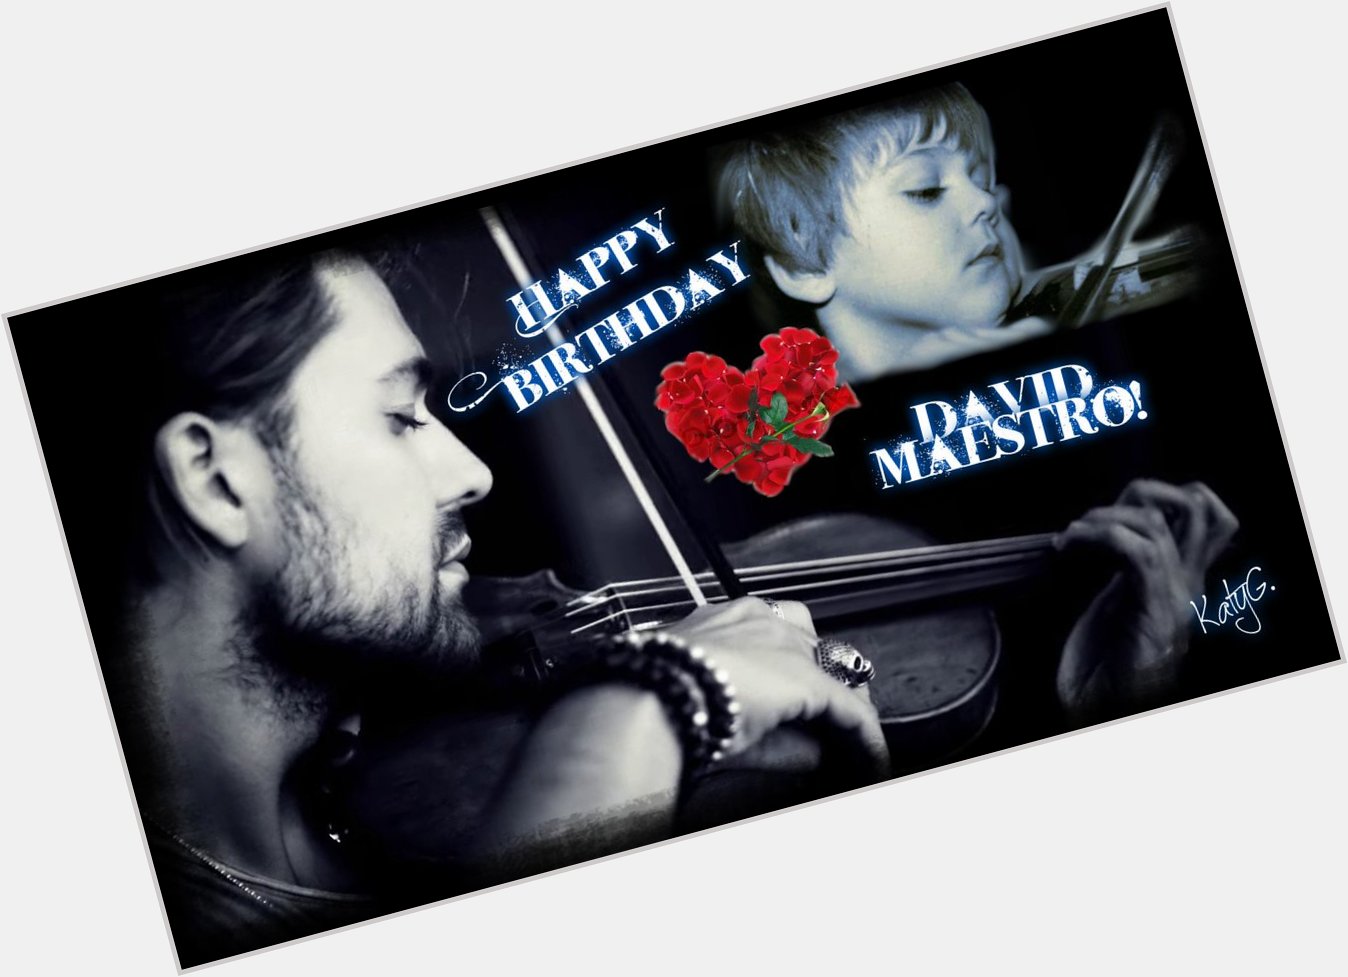  Happy Birthday Maestro!     I wish you all the best!
And Thank You for your wonderful music!    